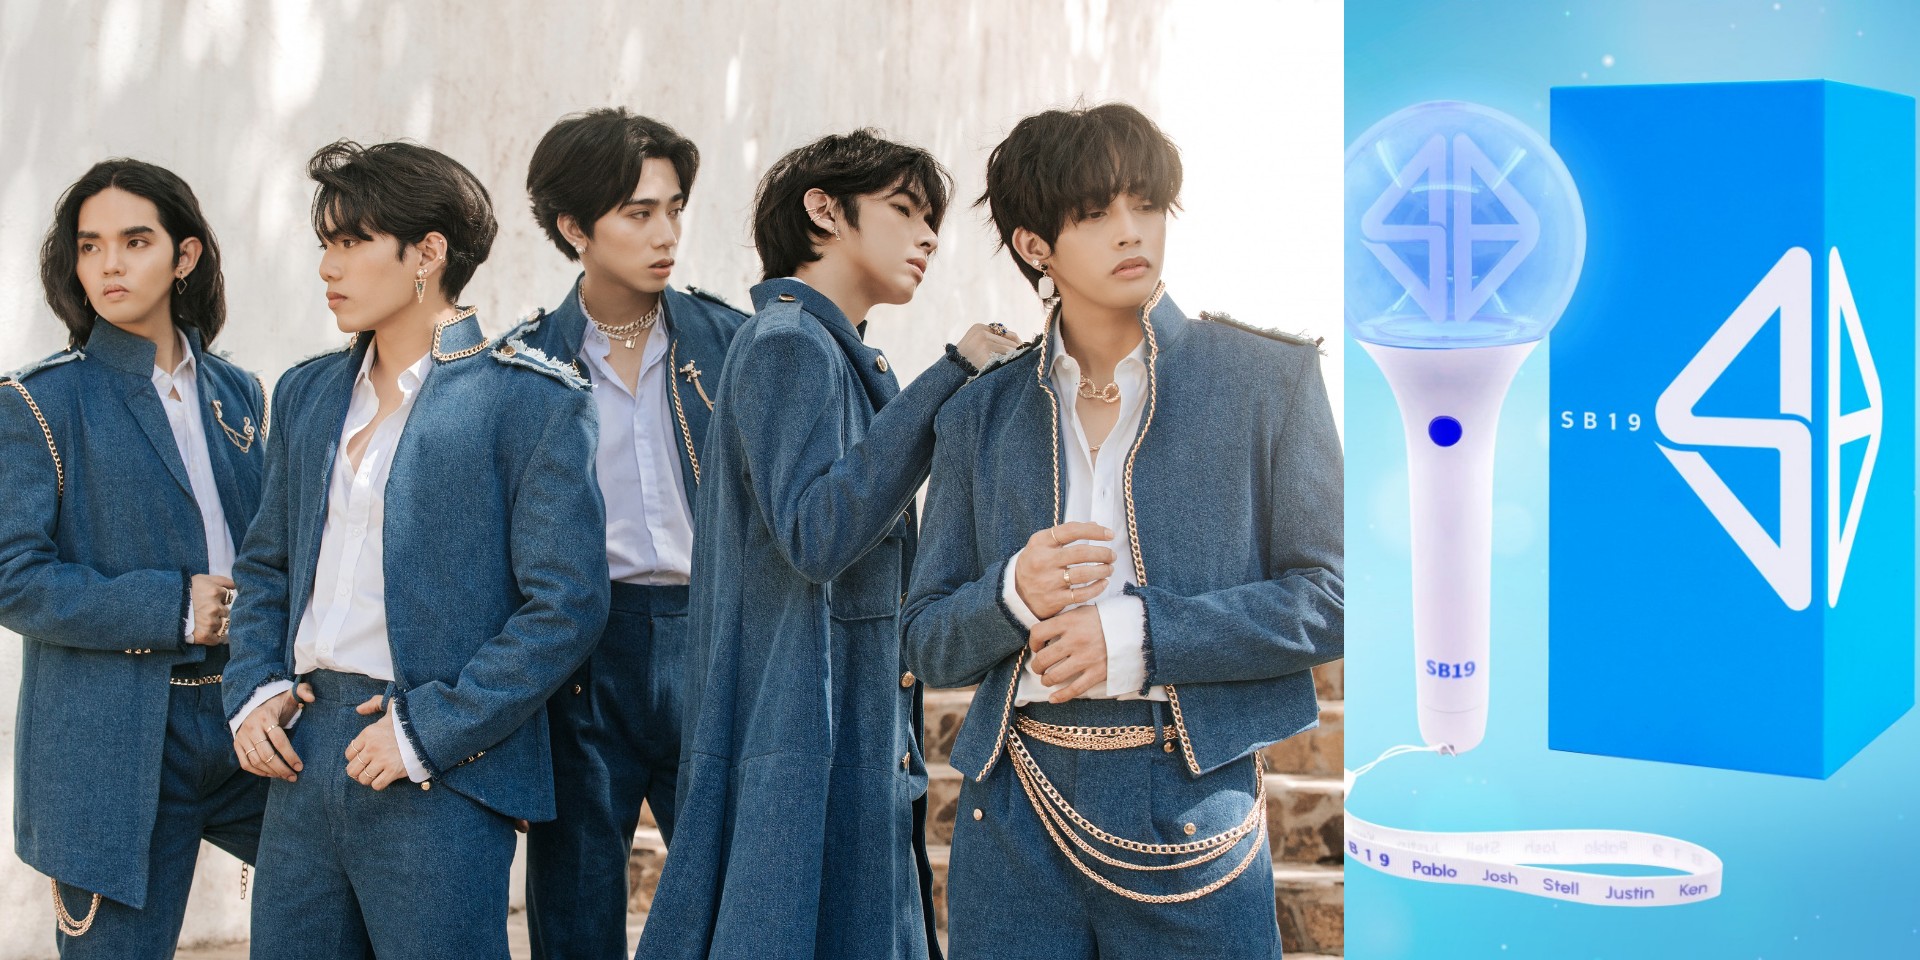 SB19 unveil new version of official lightstick for 3rd anniversary